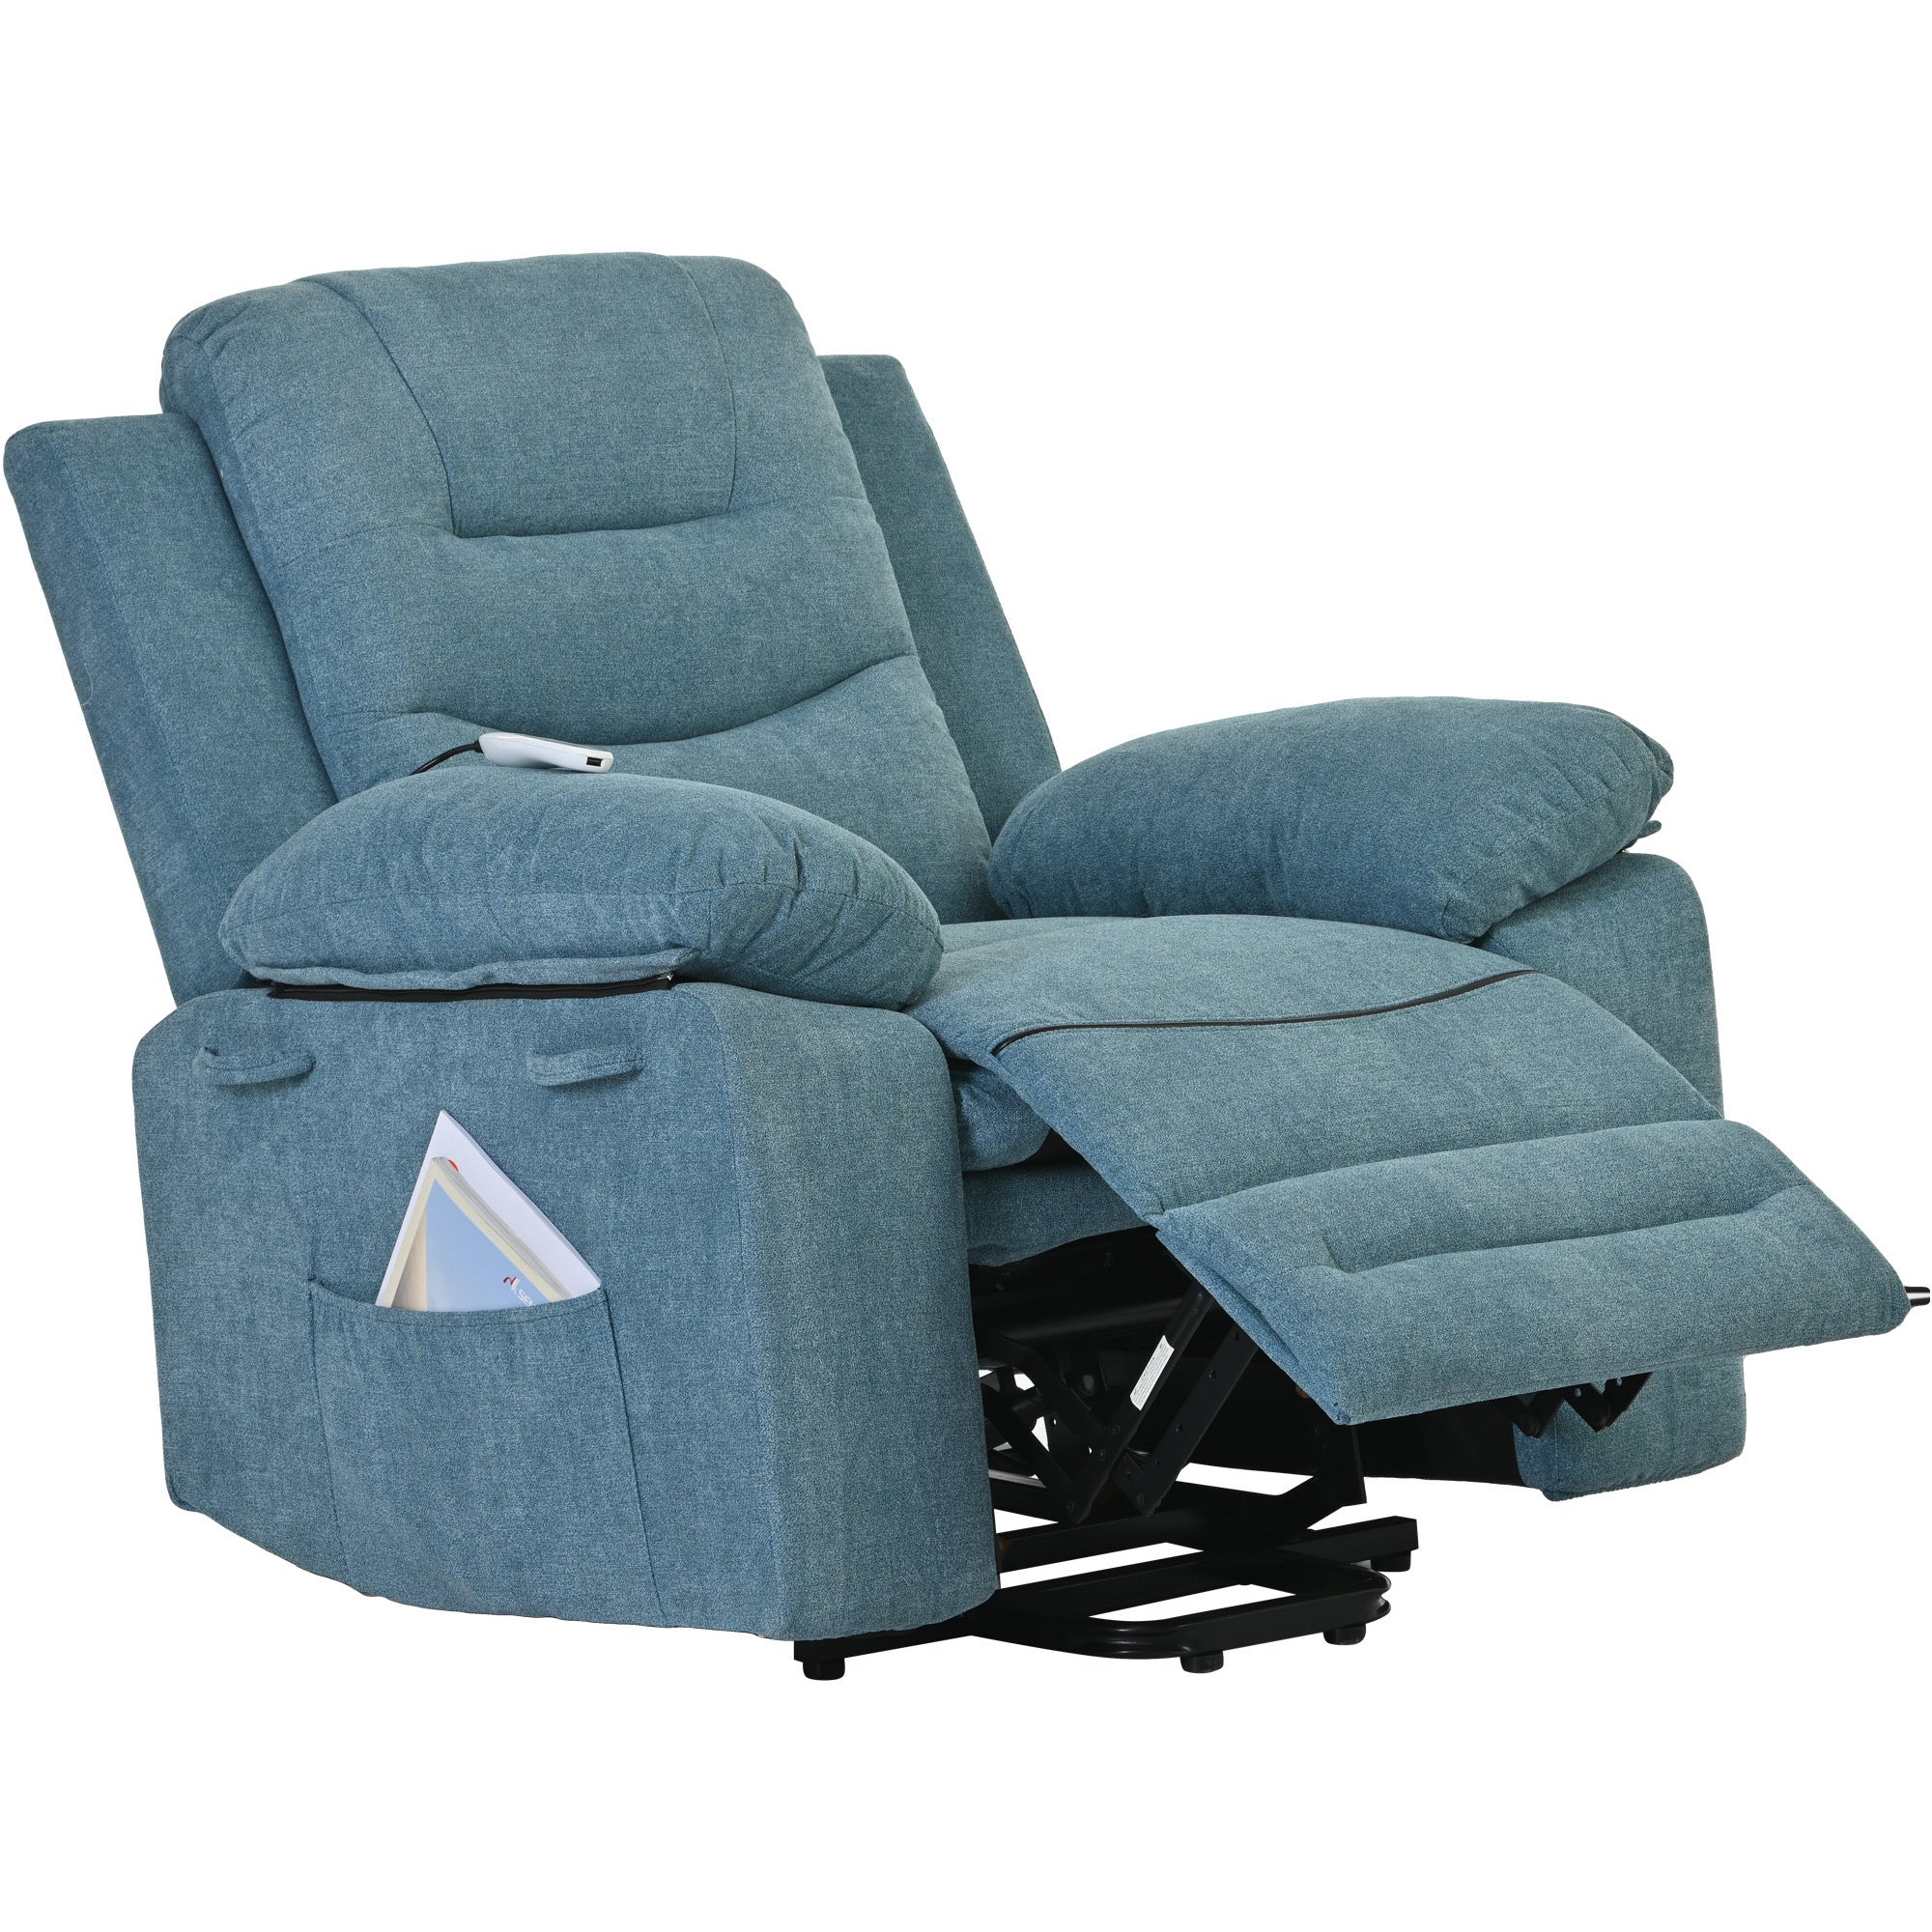 Blue Power Lift Chair with headrest and footrest slightly extended